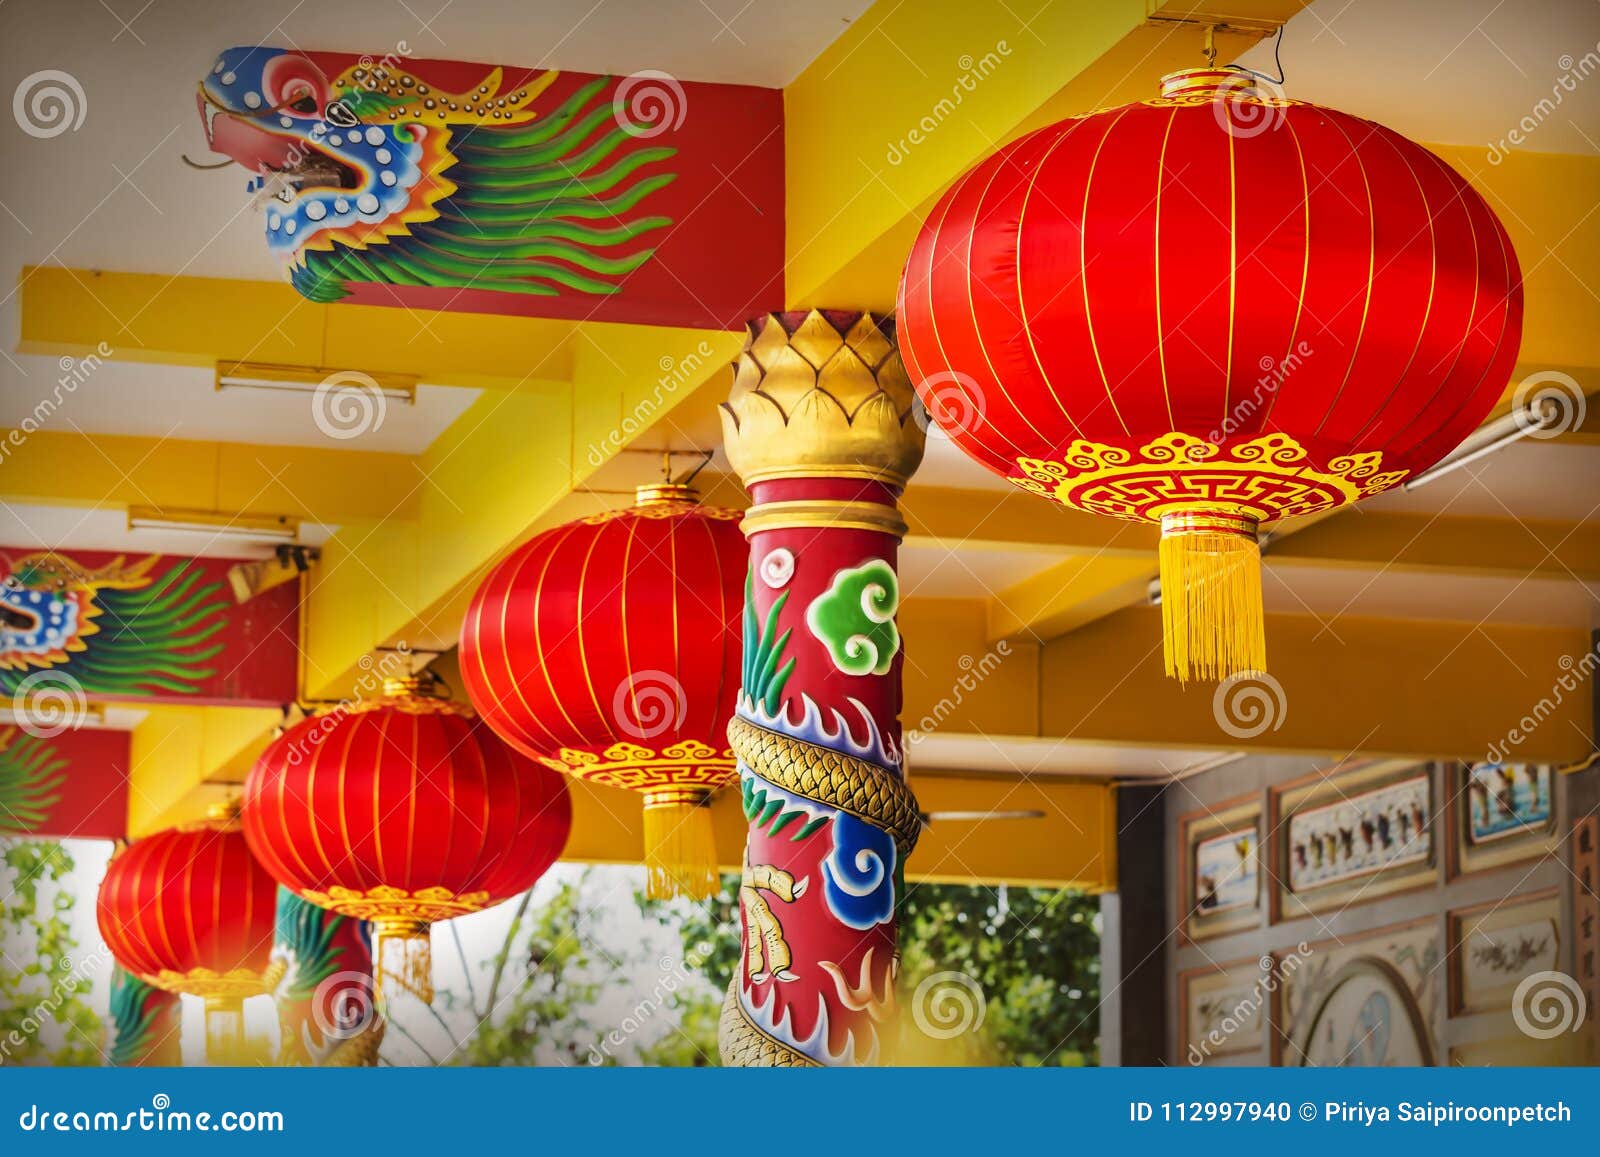 Chinese Red Paper Lanterns In Temple Hanging From The